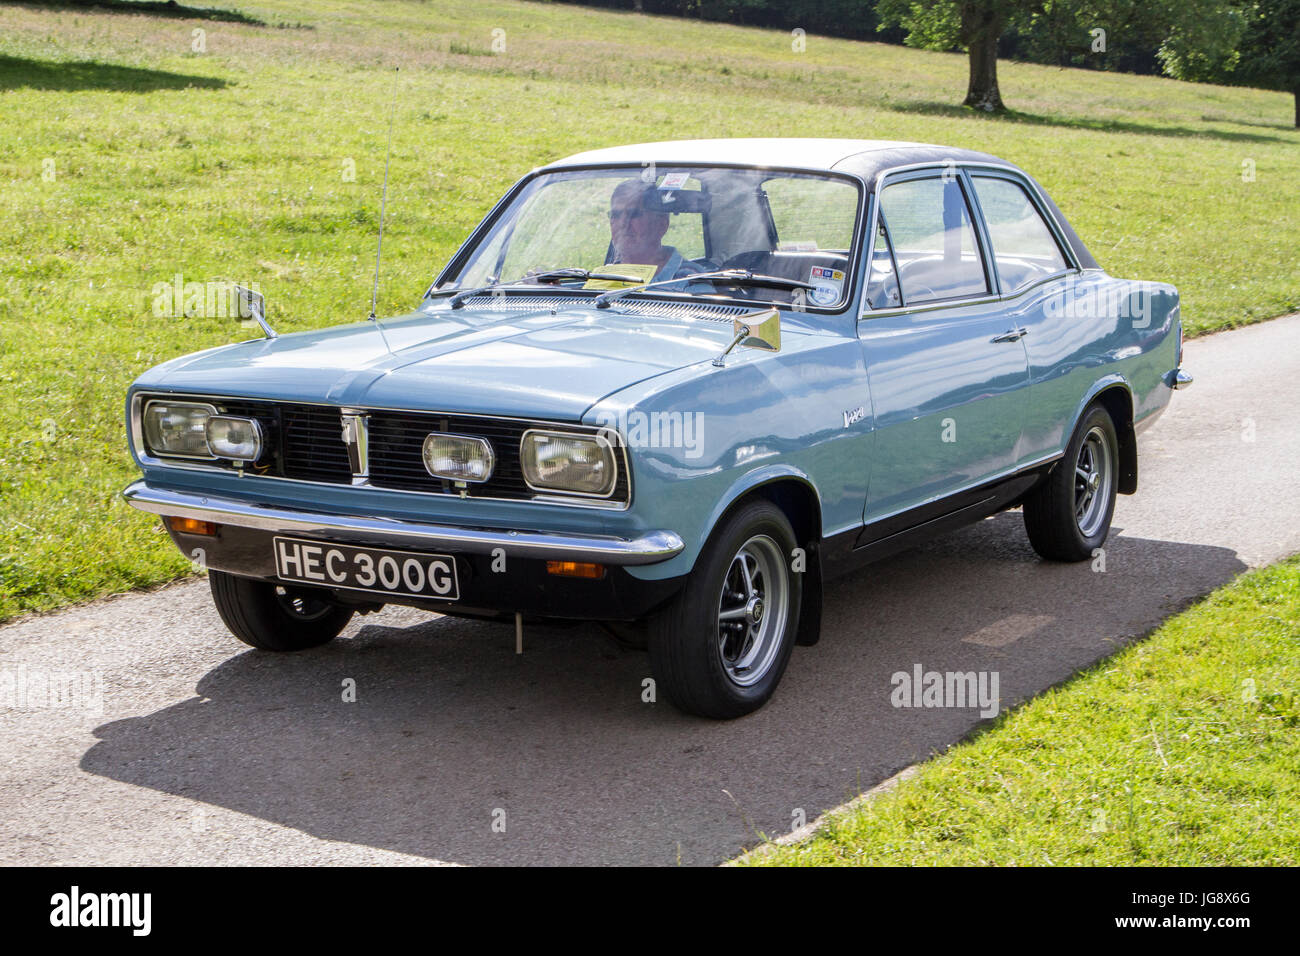 HEC300G blue Vauxhall Viva 1599 SL Classic, collectable restored vintage vehicles arriving for the Mark Woodward Event at Leighton Hall, Carnforth, UK Stock Photo